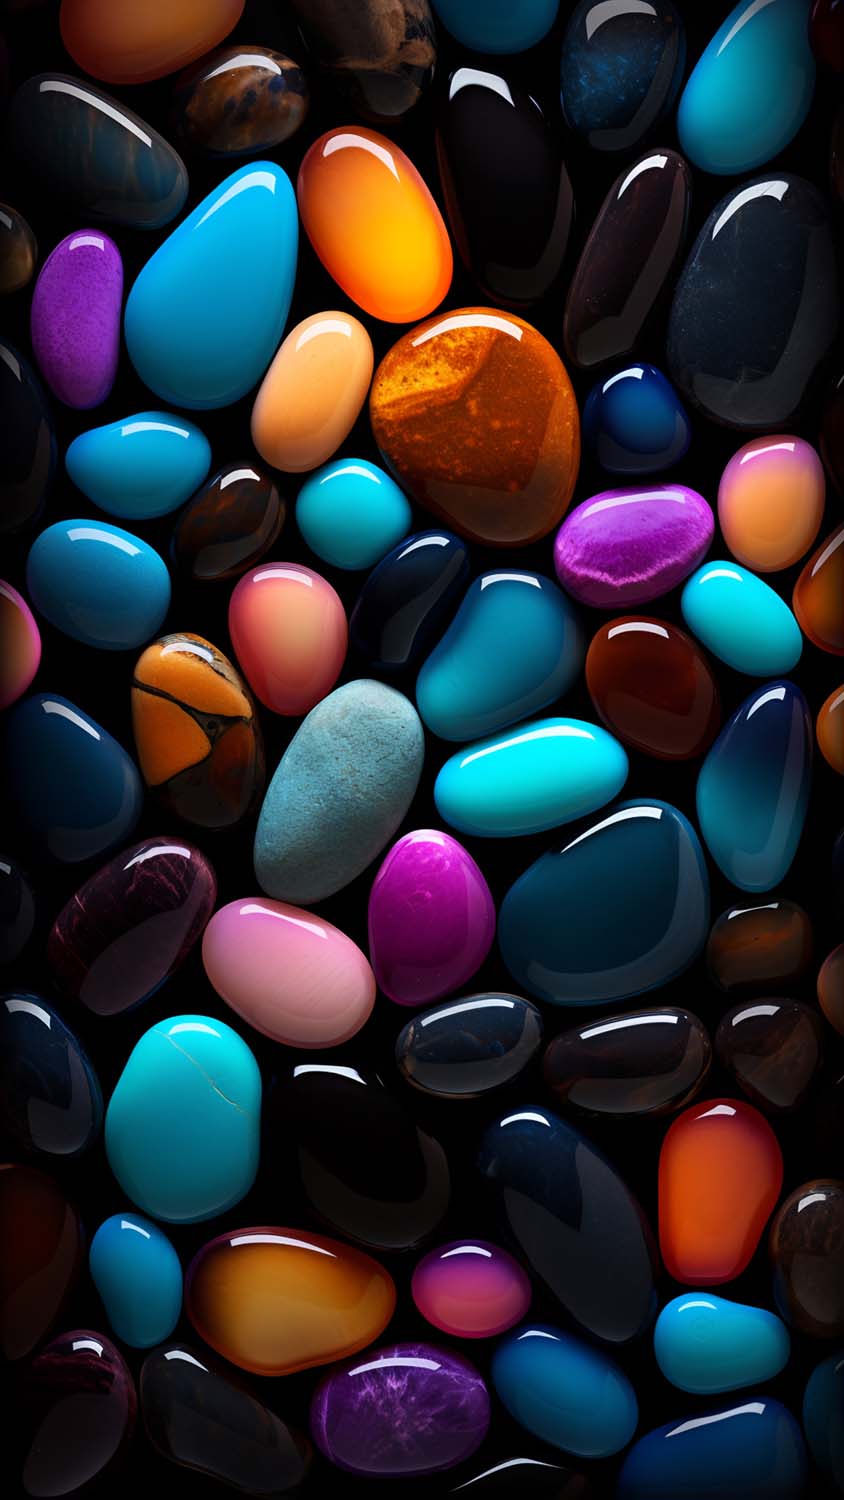 Colorful Round 3D Stones iPhone Wallpaper 4K